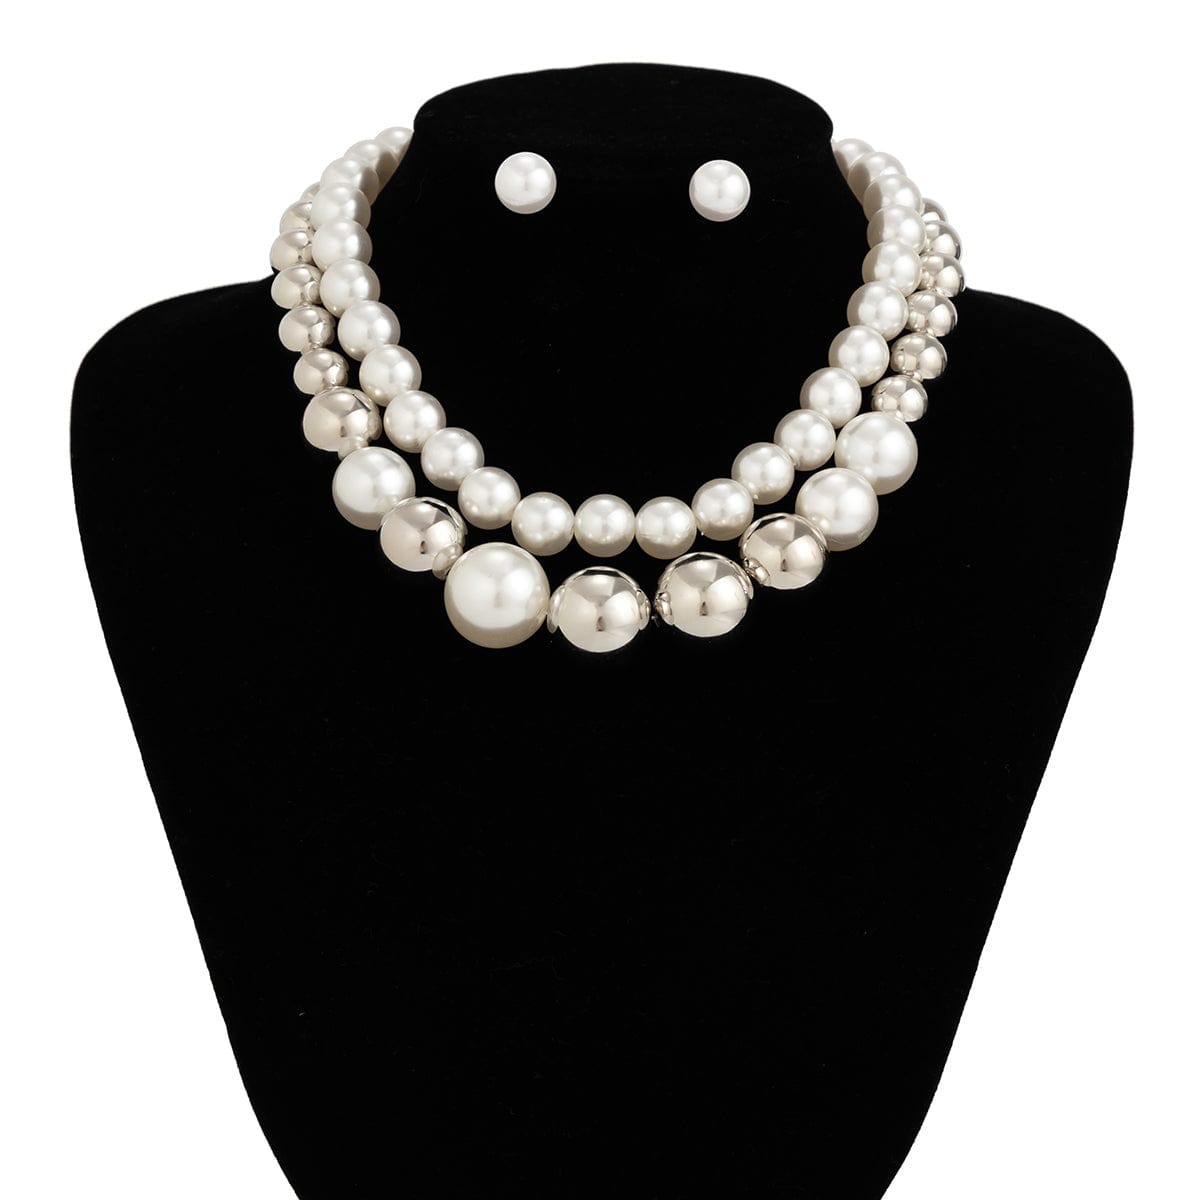 Chic Layered Silver Plated Pearl Chain Choker Necklace Earrings Set - ArtGalleryZen